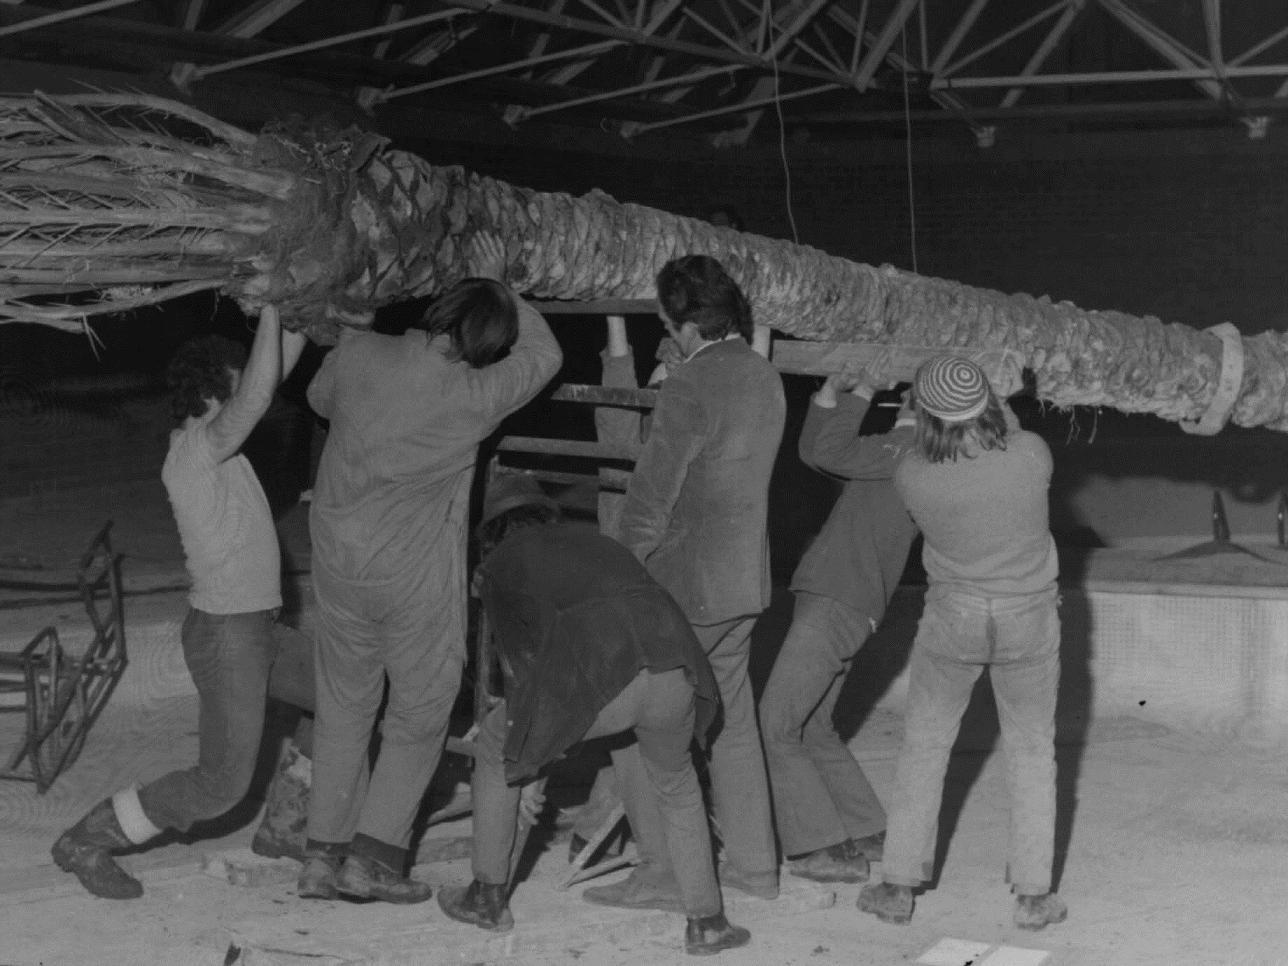 Installing palm trees at Bletchley Leisure Pool in January 1974 no.1